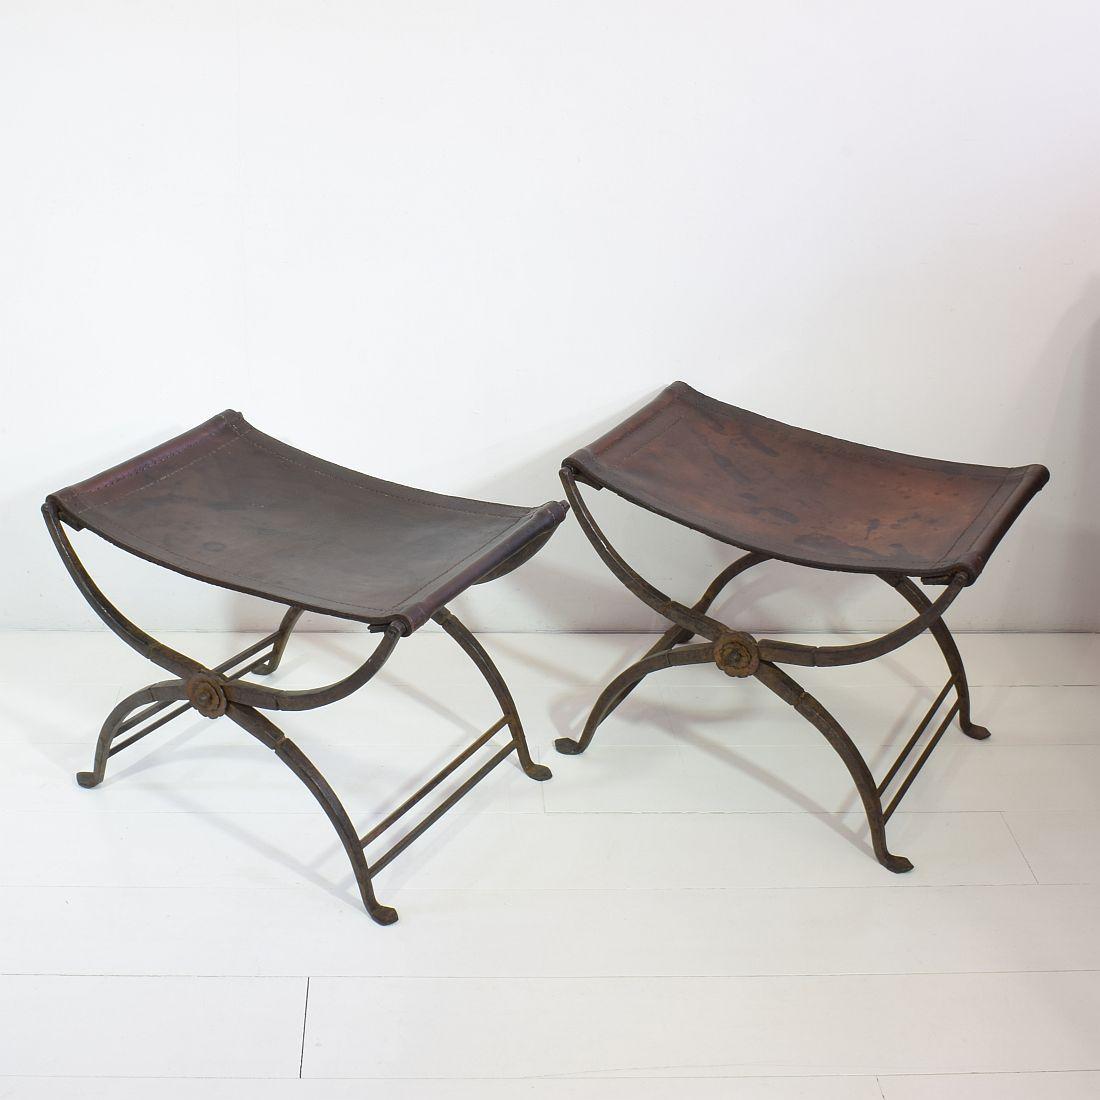 A wonderful and very rare pair of early 19th century Italian wrought iron folding Curule stools with a handstitched saddle leather seat and decorative floral rosettes on both sides where the legs cross. Curule seats were designed by early Romans and